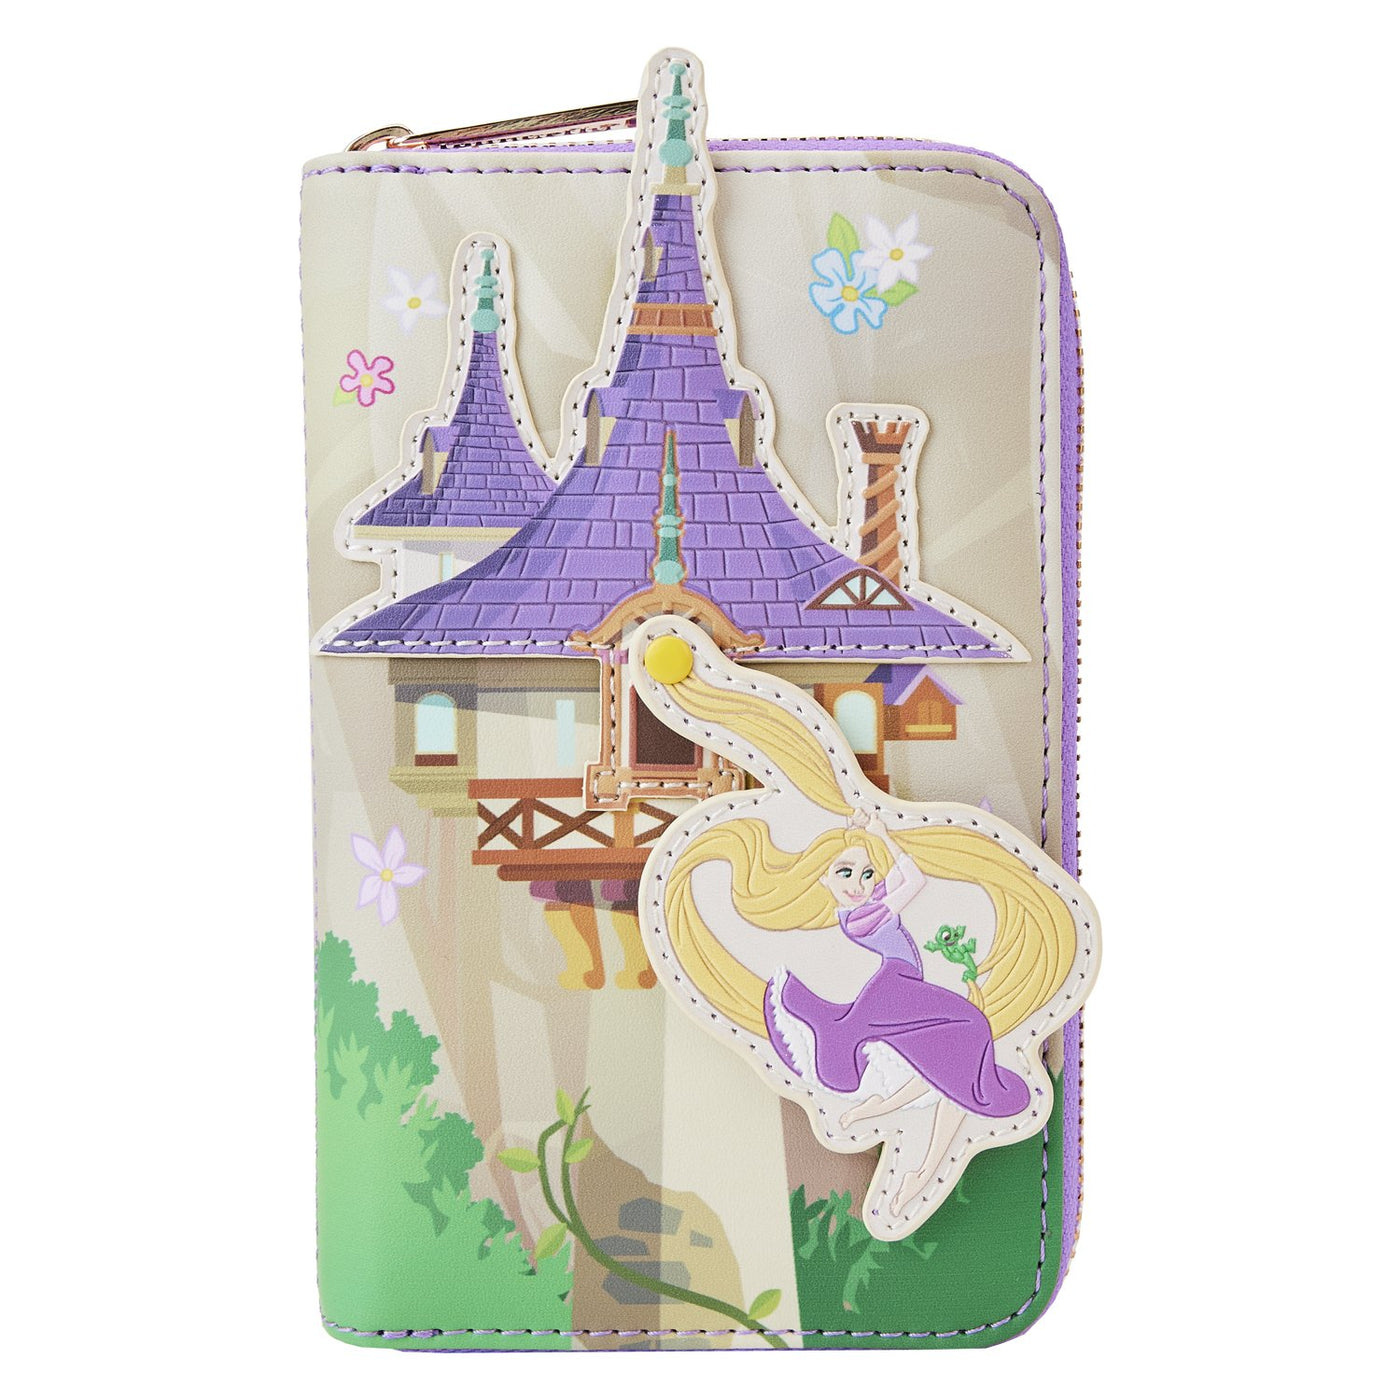 Loungefly Disney Tangled Rapunzel Swinging From Tower Zip-Around Wallet - Alternate Front View